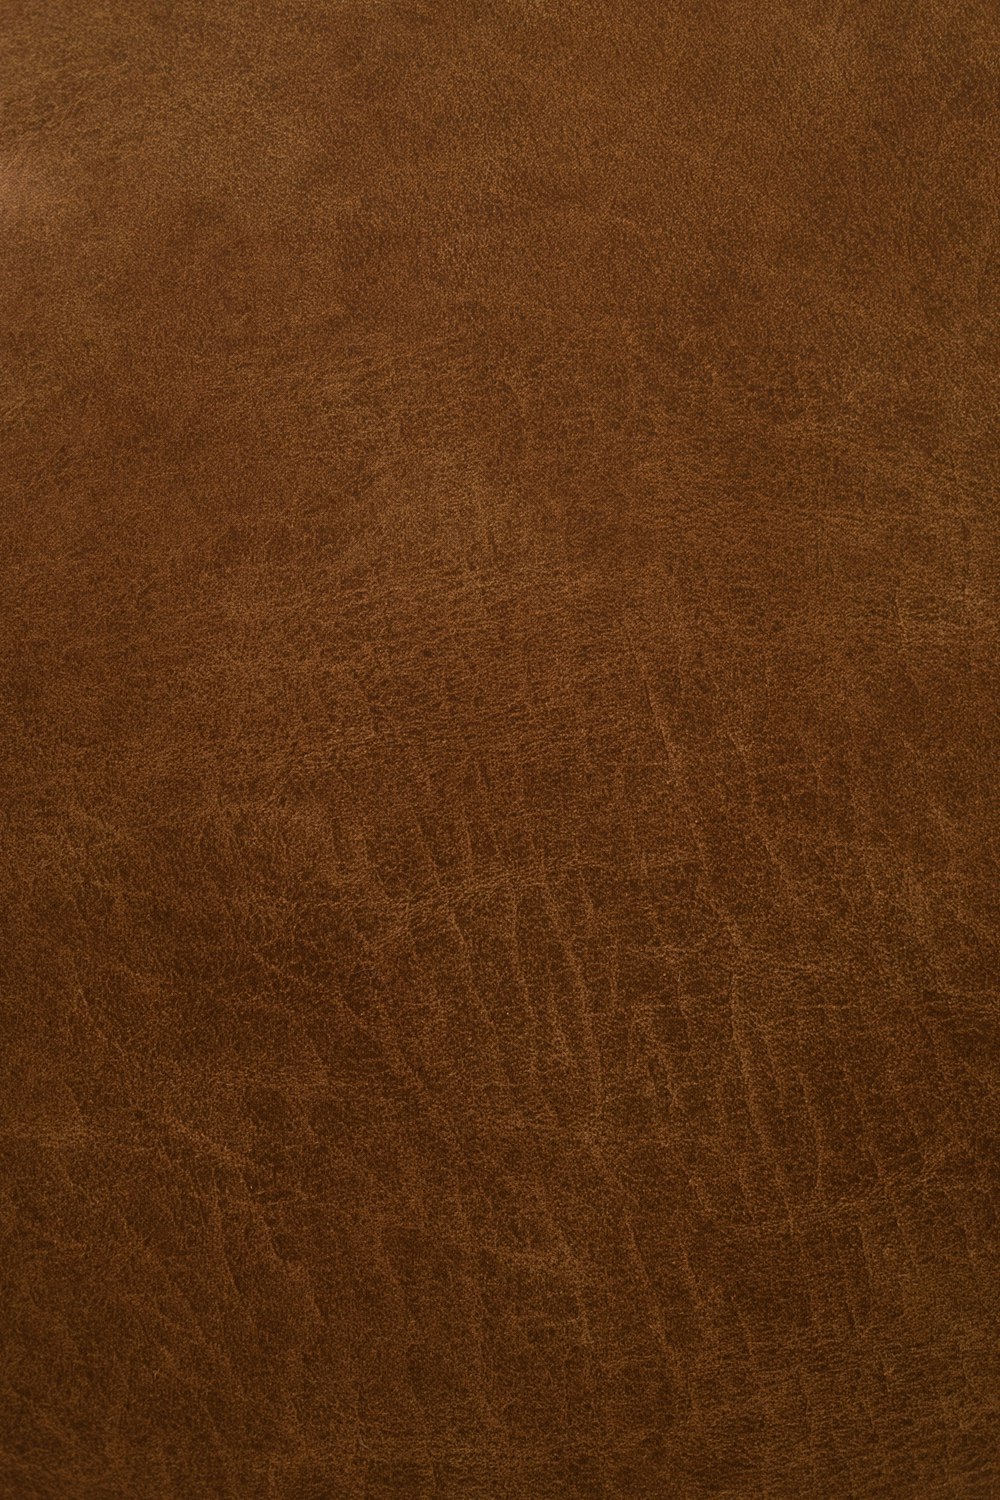 brown leather